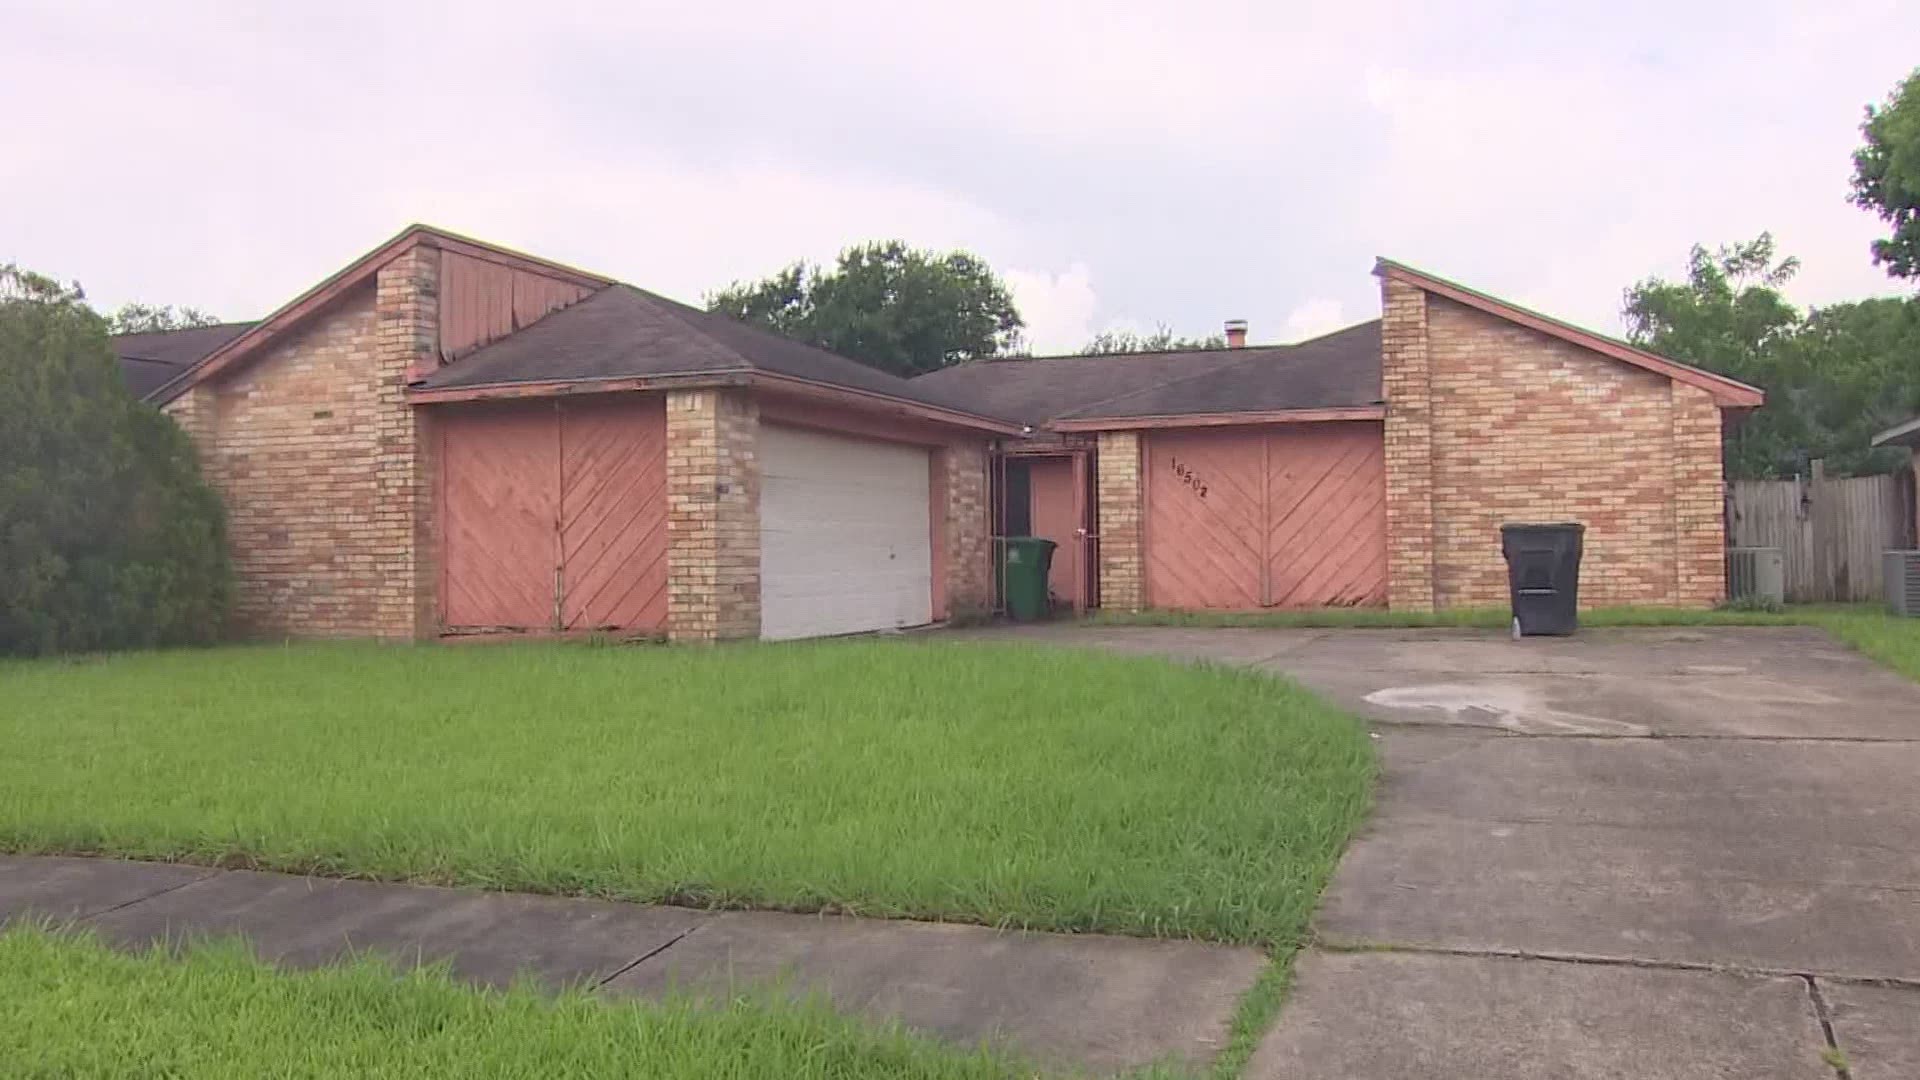 Houston police responded to a woman’s call for assistance and ended up finding a body inside a home in the Missouri City area early Tuesday.